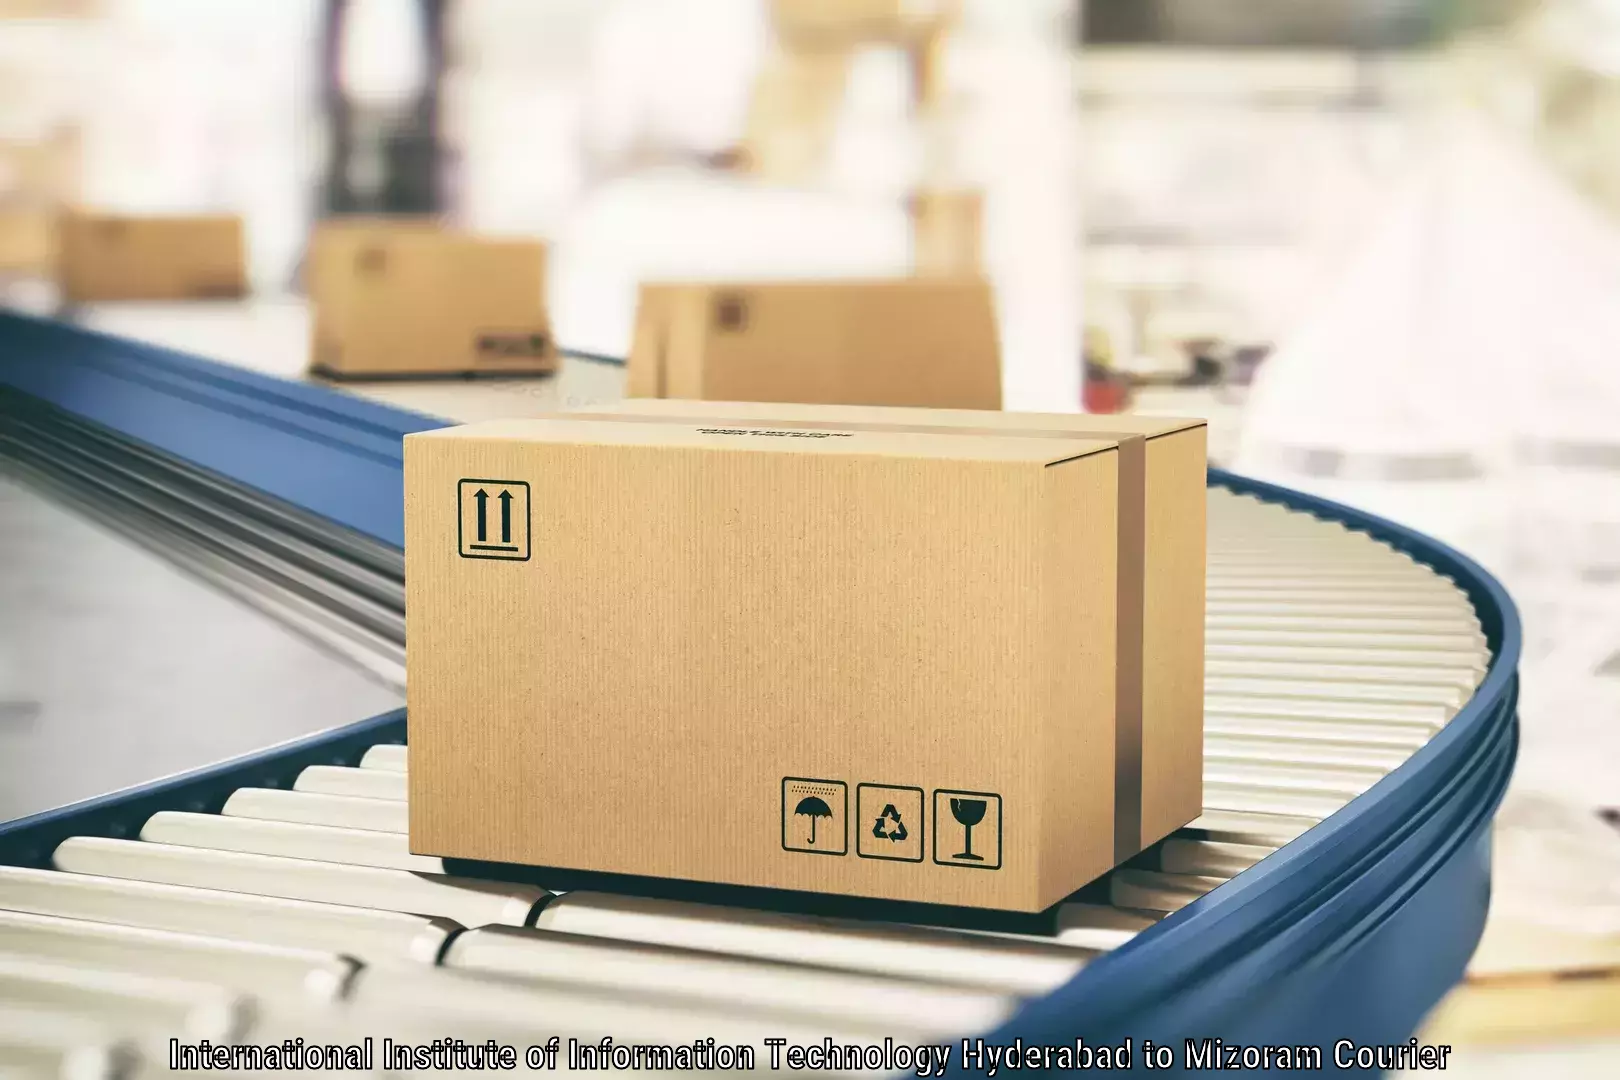 Retail shipping solutions International Institute of Information Technology Hyderabad to Mizoram